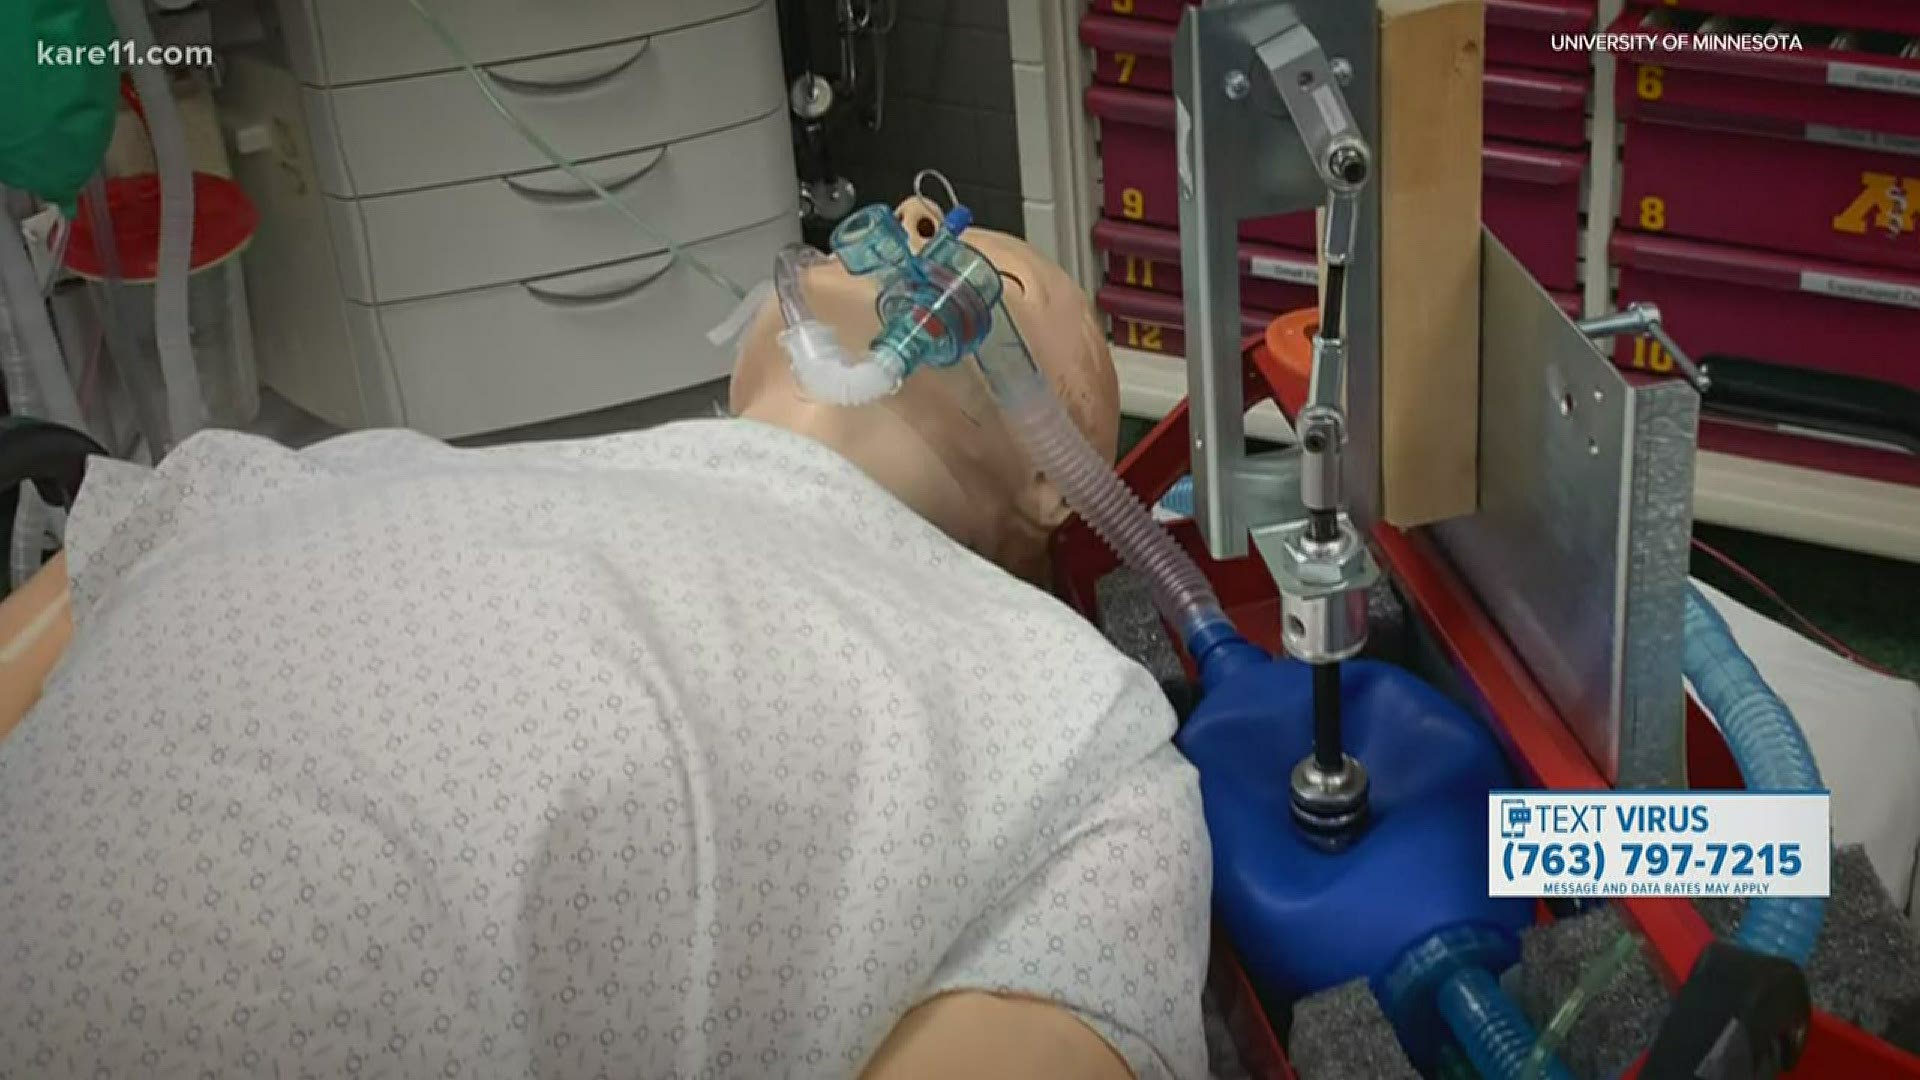 The creative, makeshift ventilator concept born at the University of Minnesota can now move forward for manufacturing.